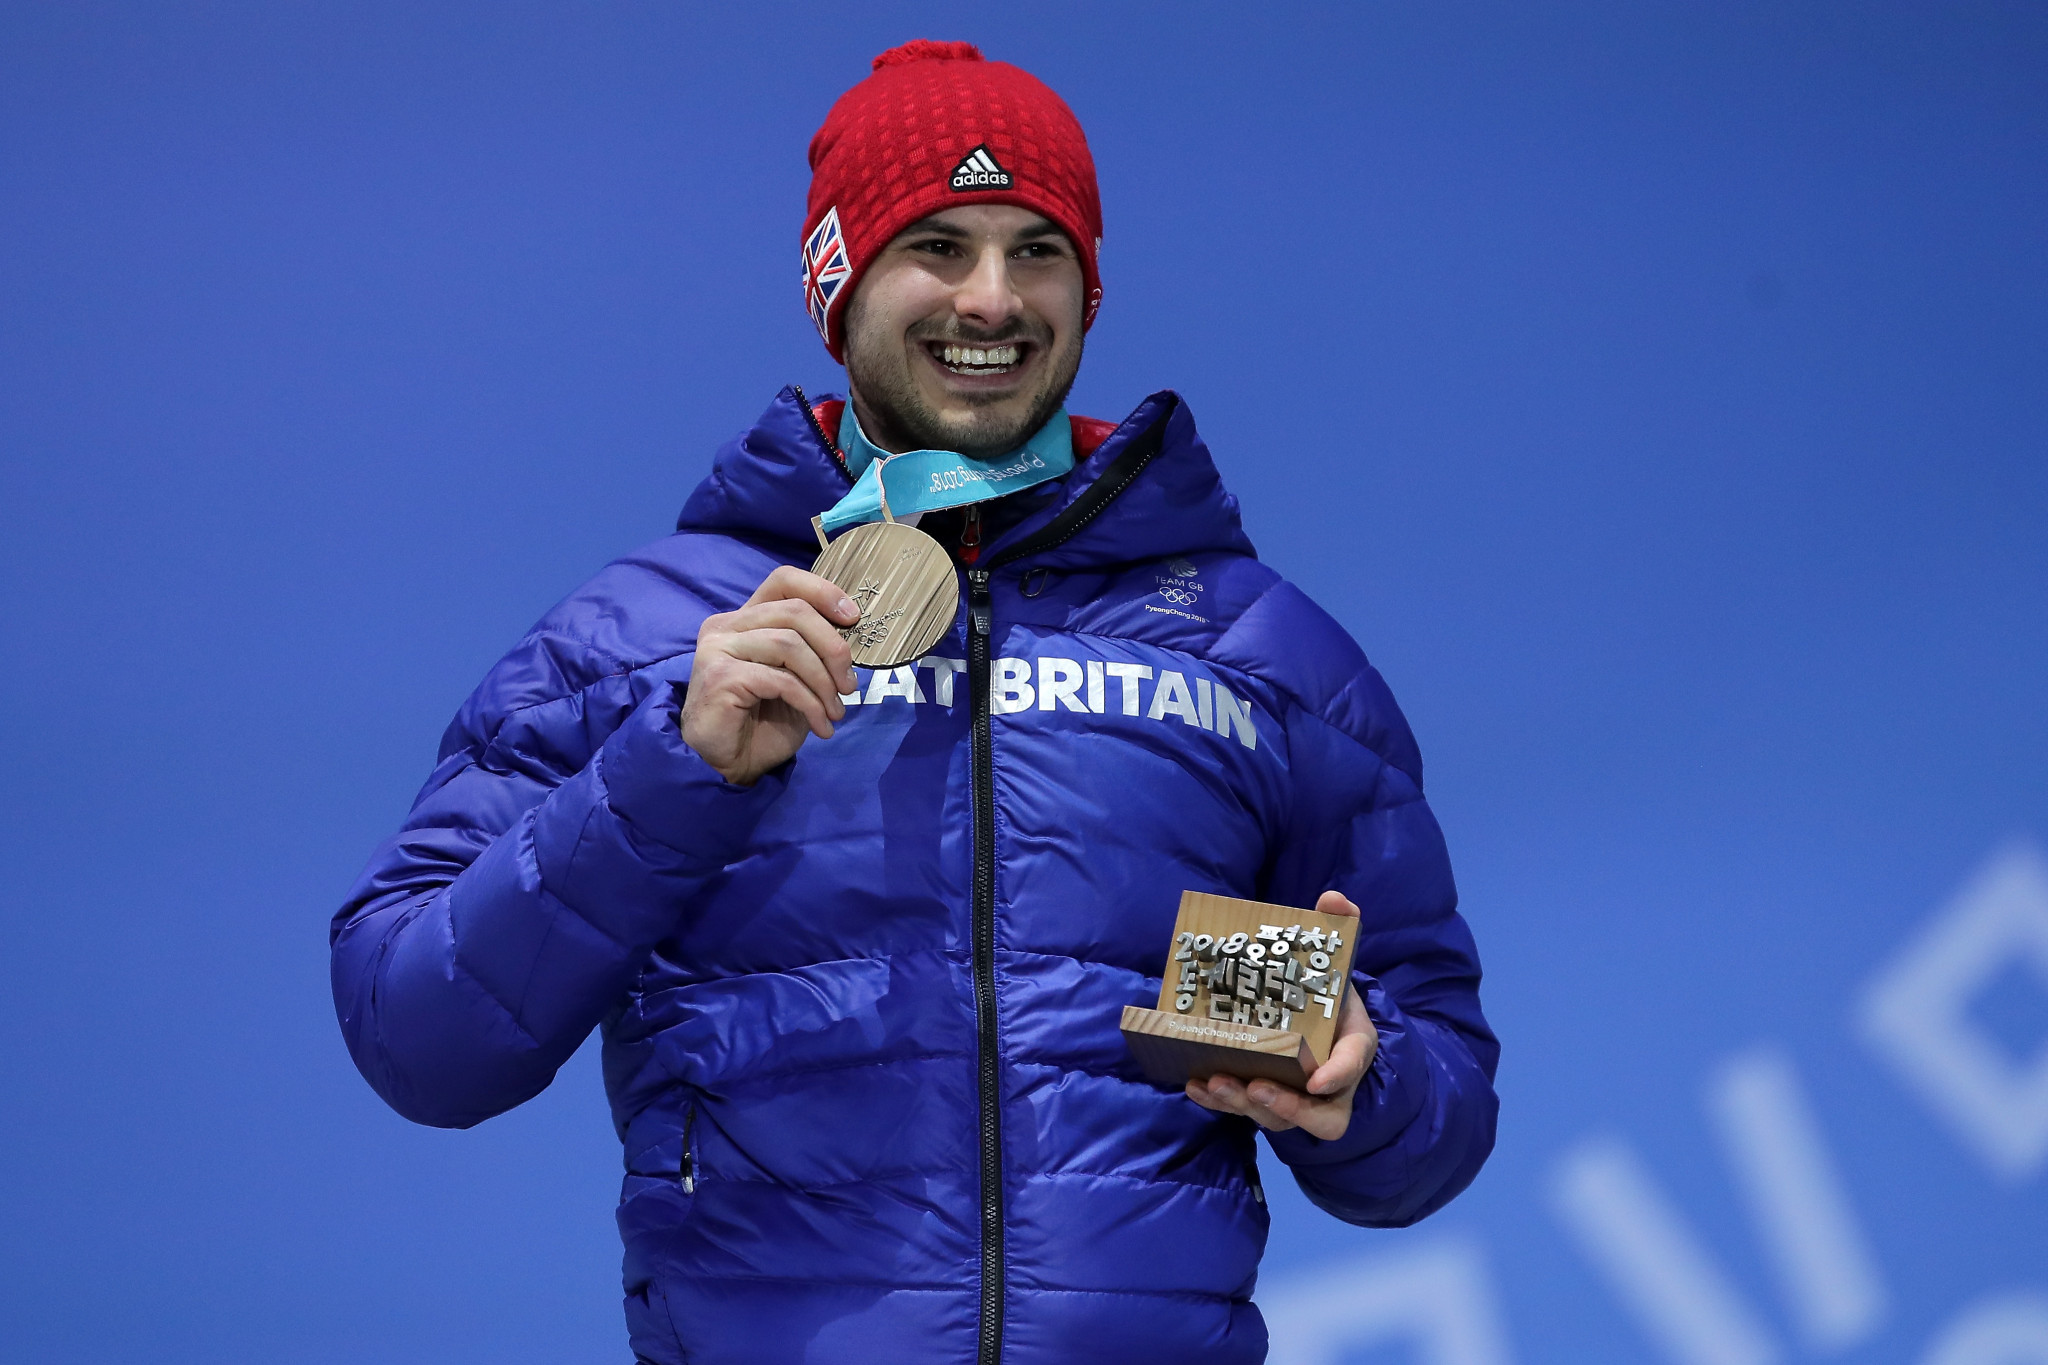 Dom Parsons' bronze medal at Pyeongchang 2018 was Britain's first won by a male in the sport for 70 years ©Getty Images